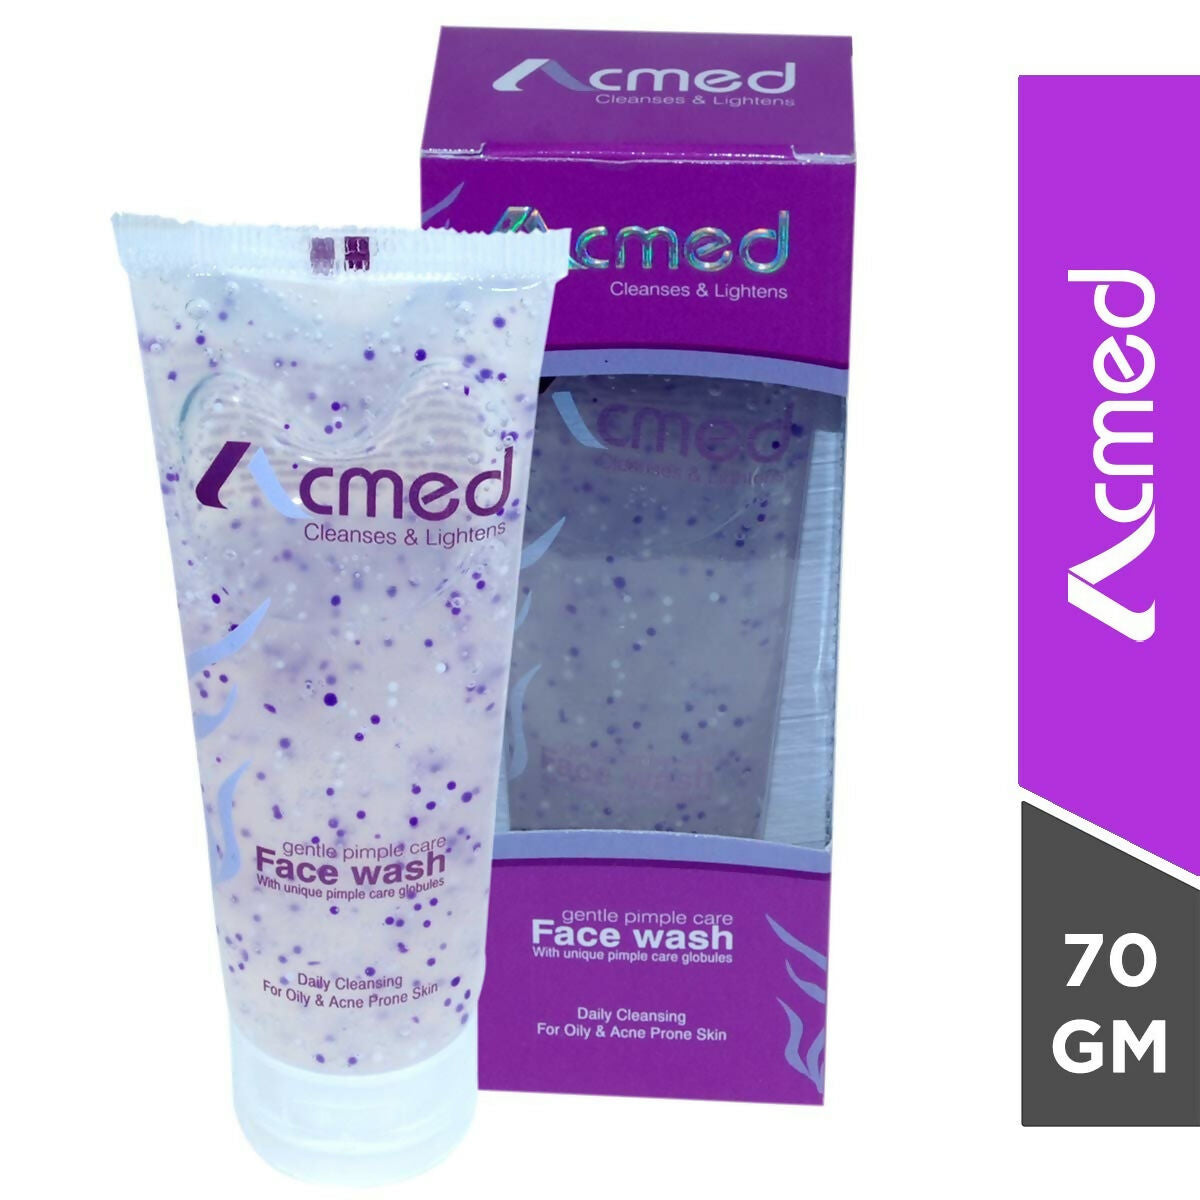 Acmed Pimple Care Acne Prevention Face Wash